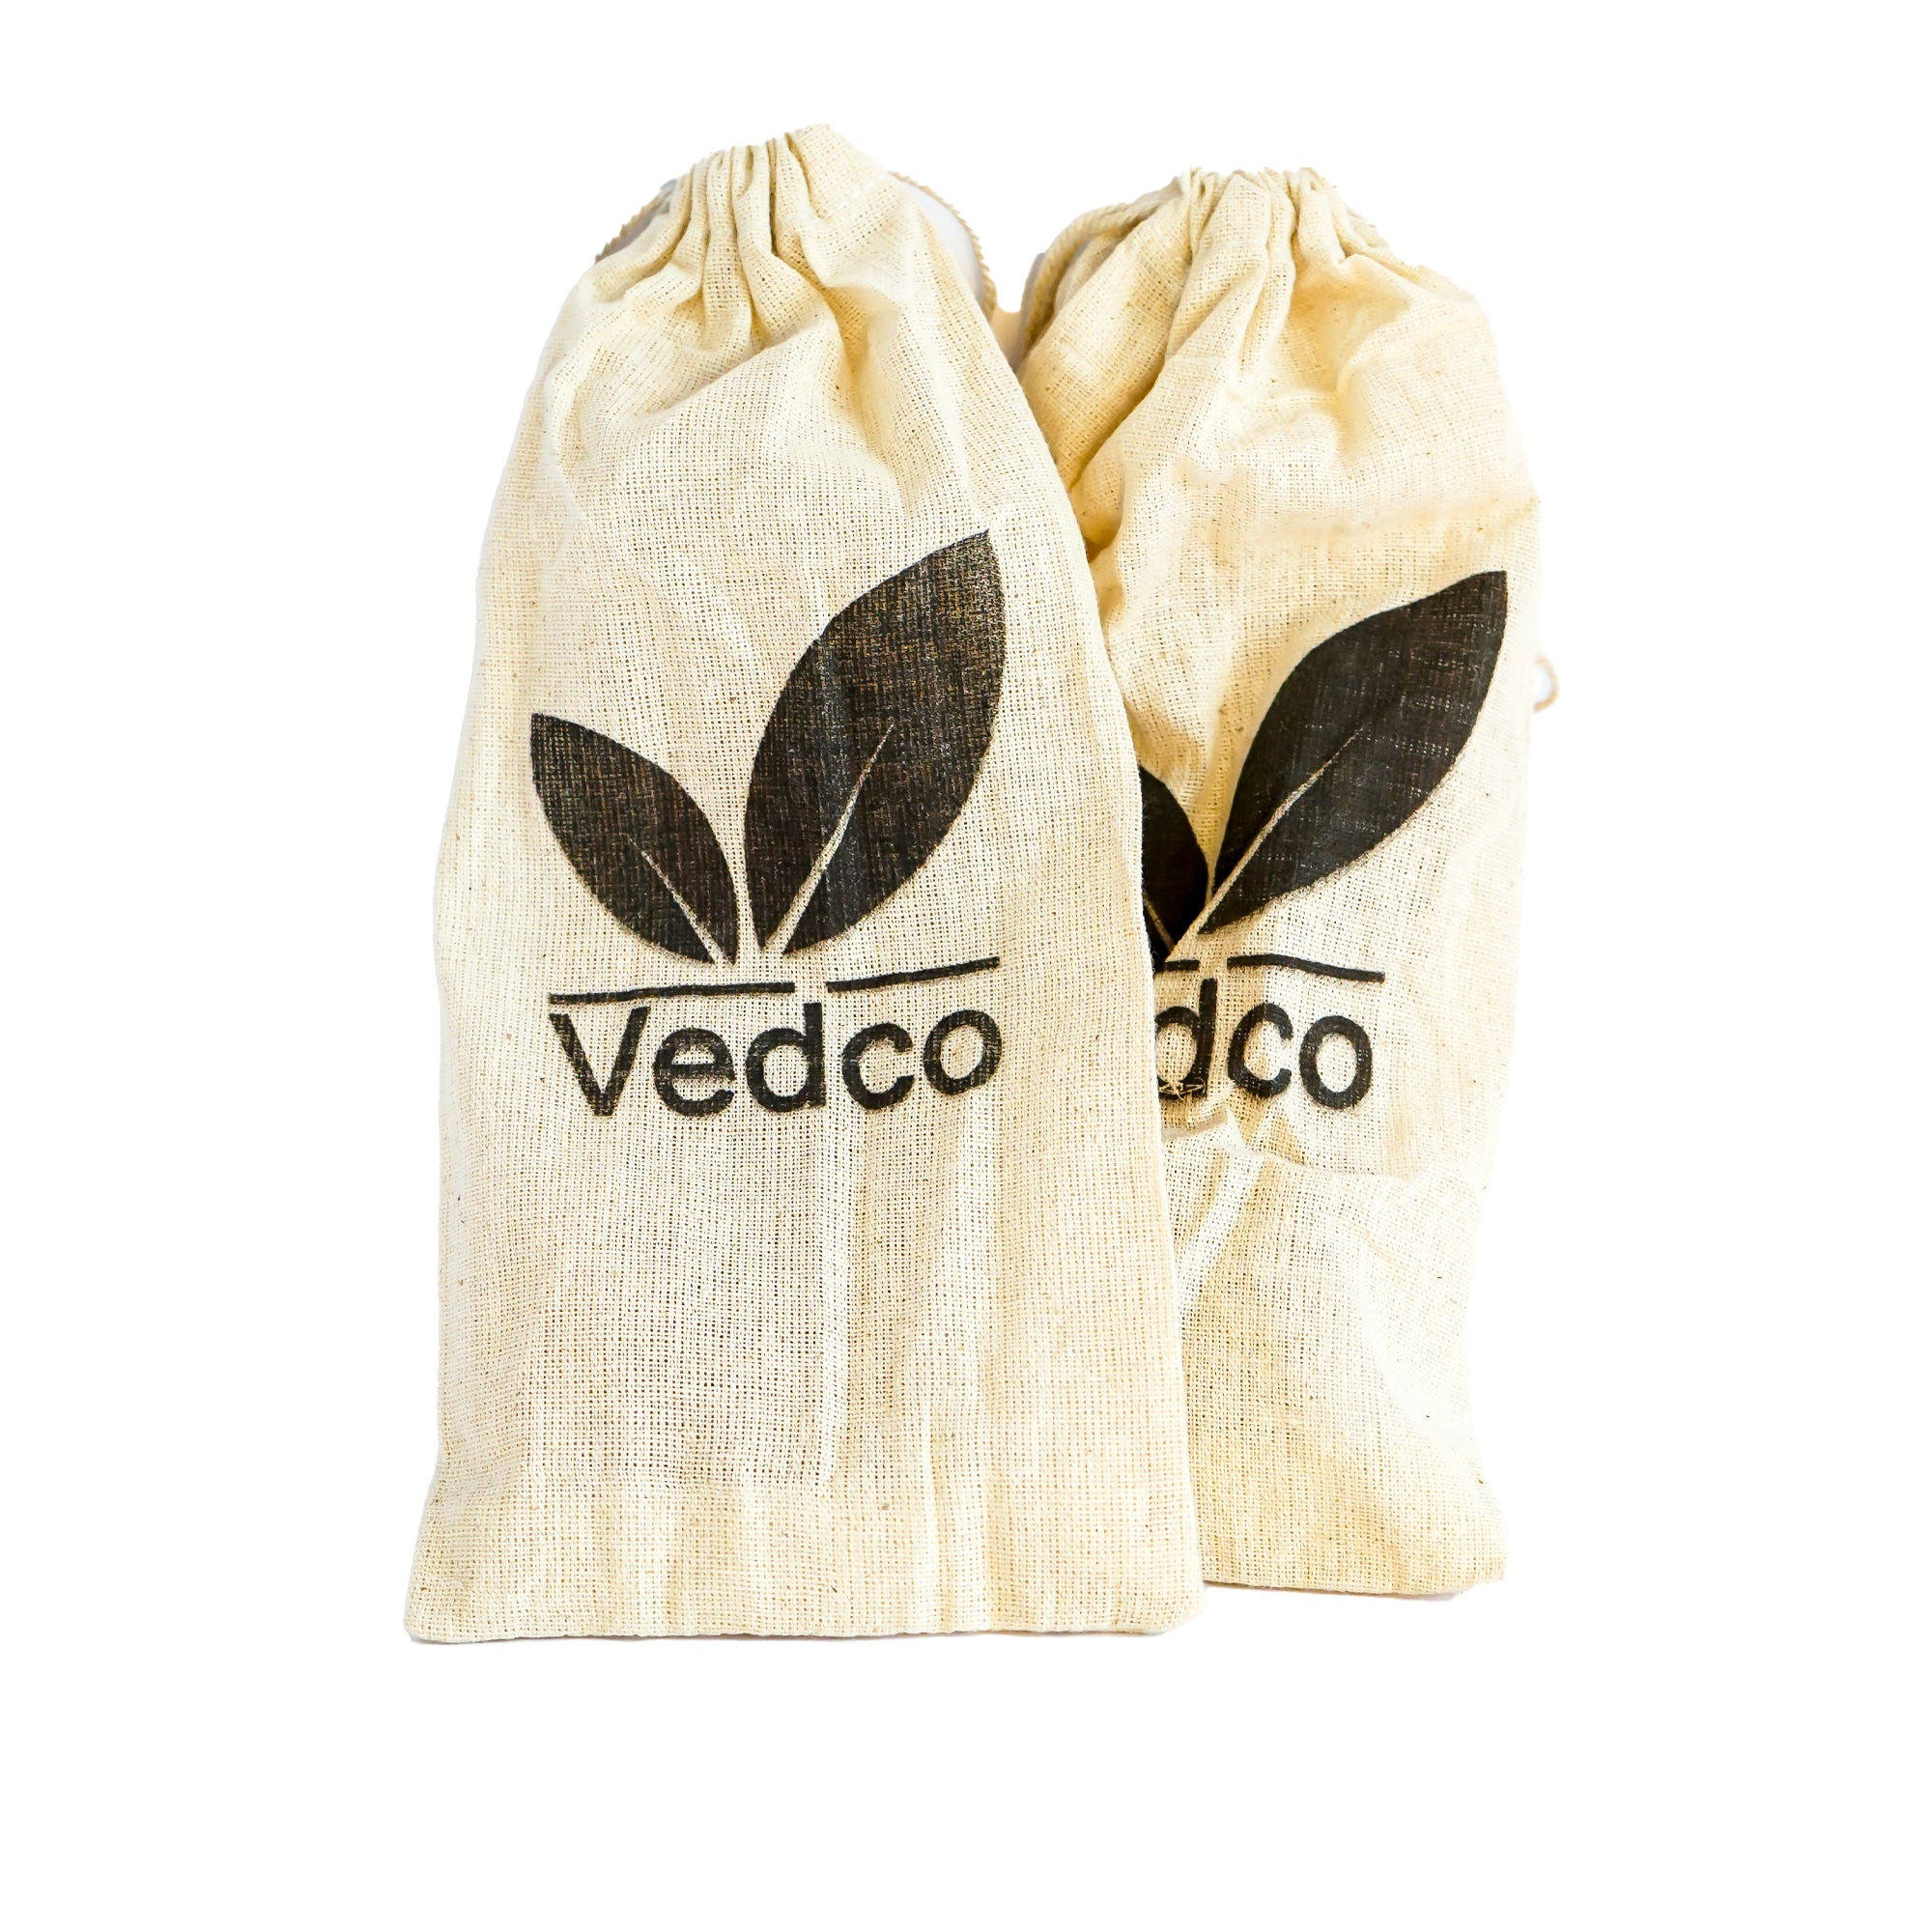 Vedco Opulent Neem Hair Comb Set | With Cotton Pouches